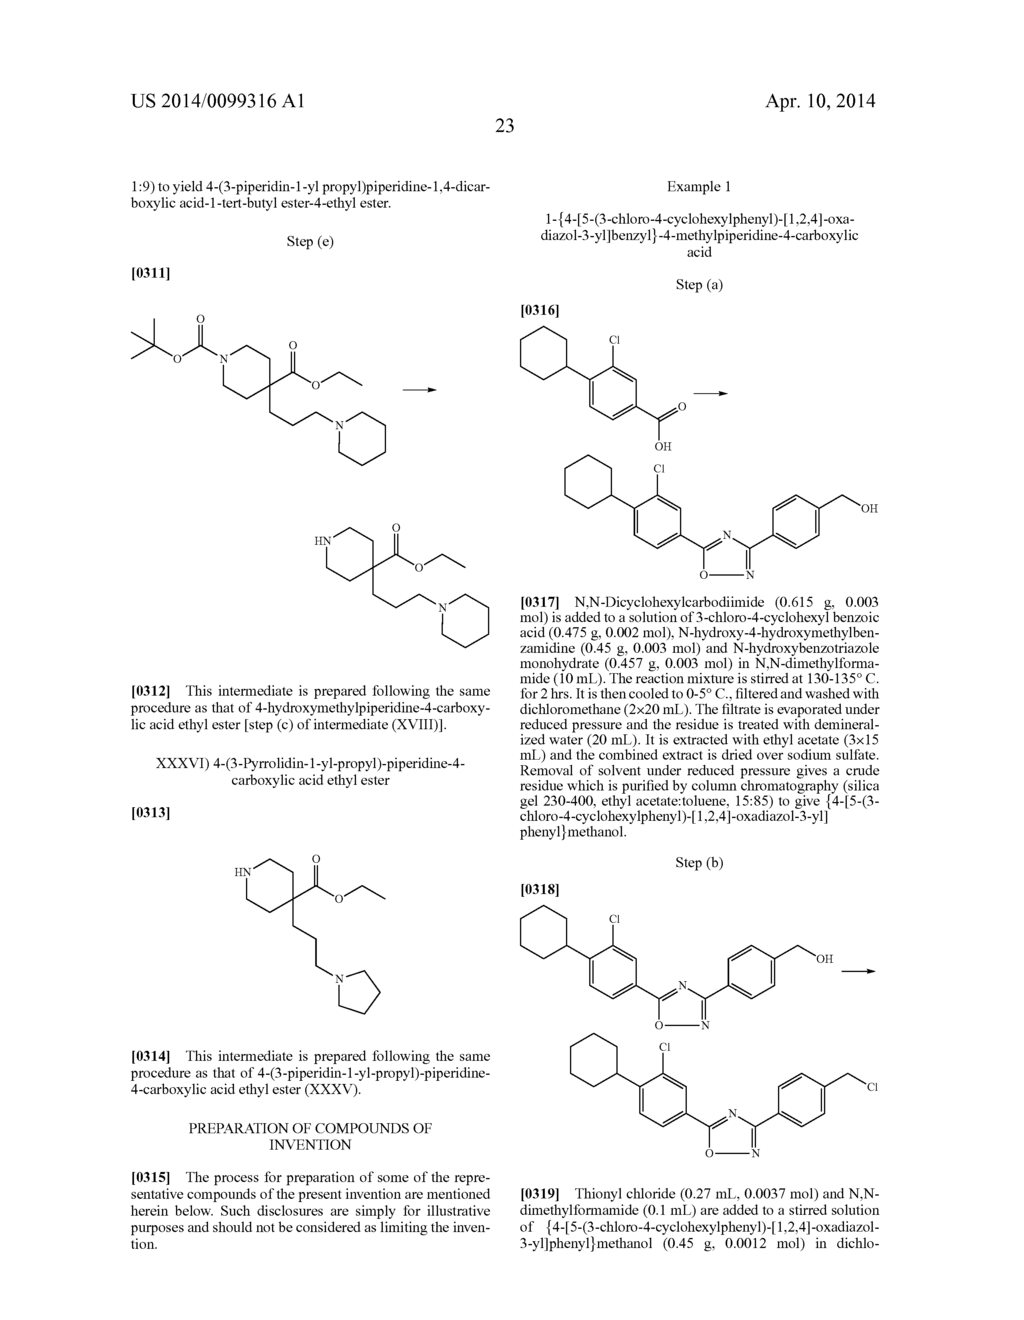 NOVEL PIPERIDINYL MONOCARBOXYLIC ACIDS AS S1P1 RECEPTOR AGONISTS - diagram, schematic, and image 24